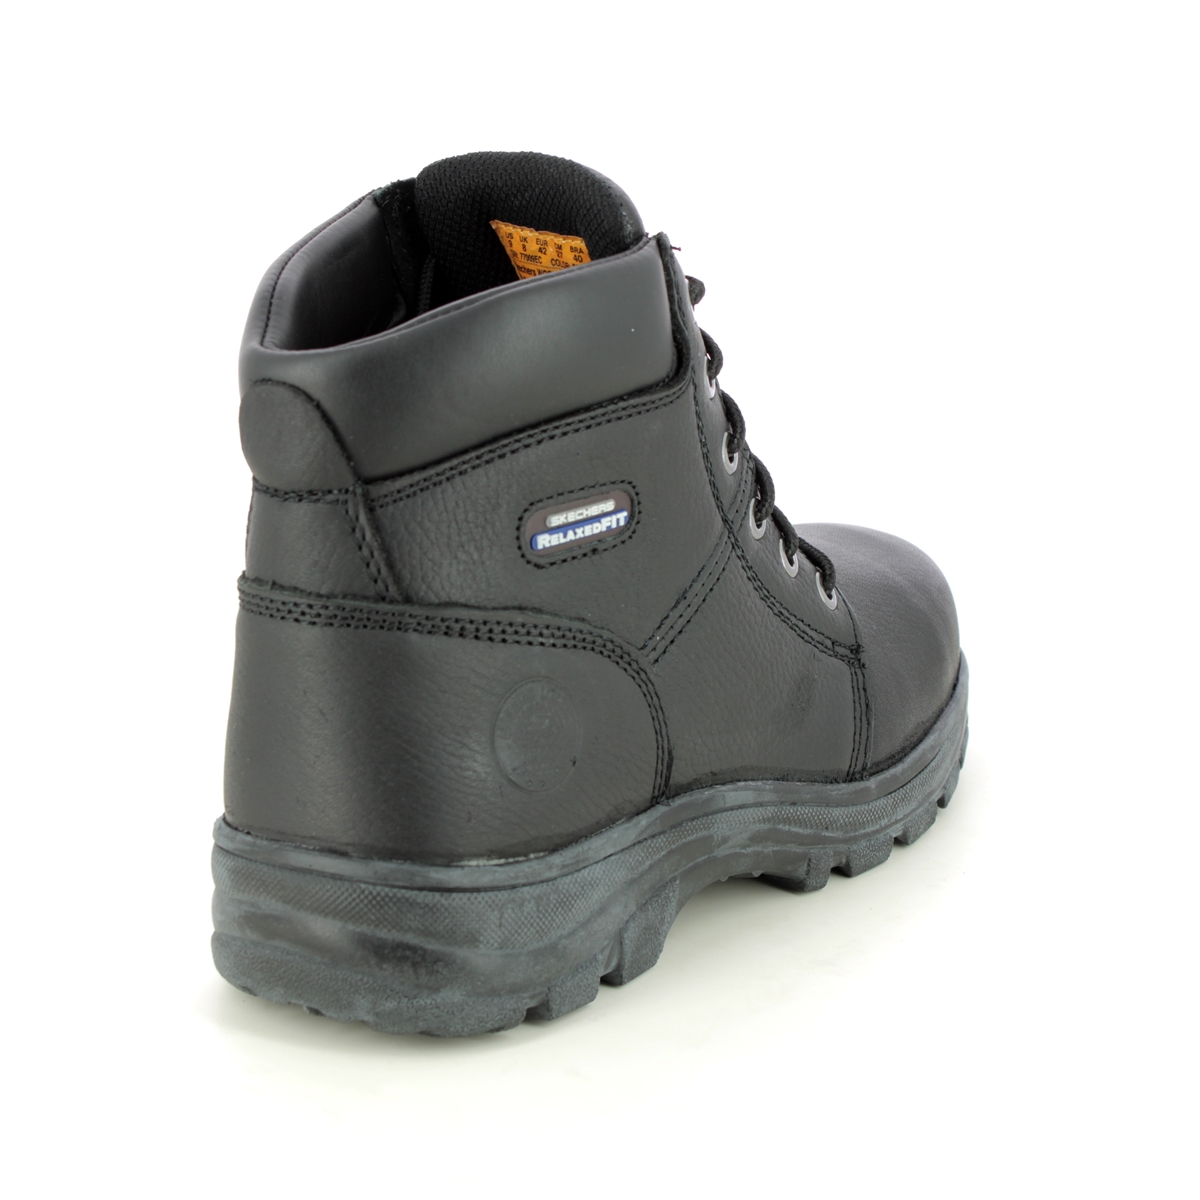 Skechers Safety Work Boot Toe BLK Black boots